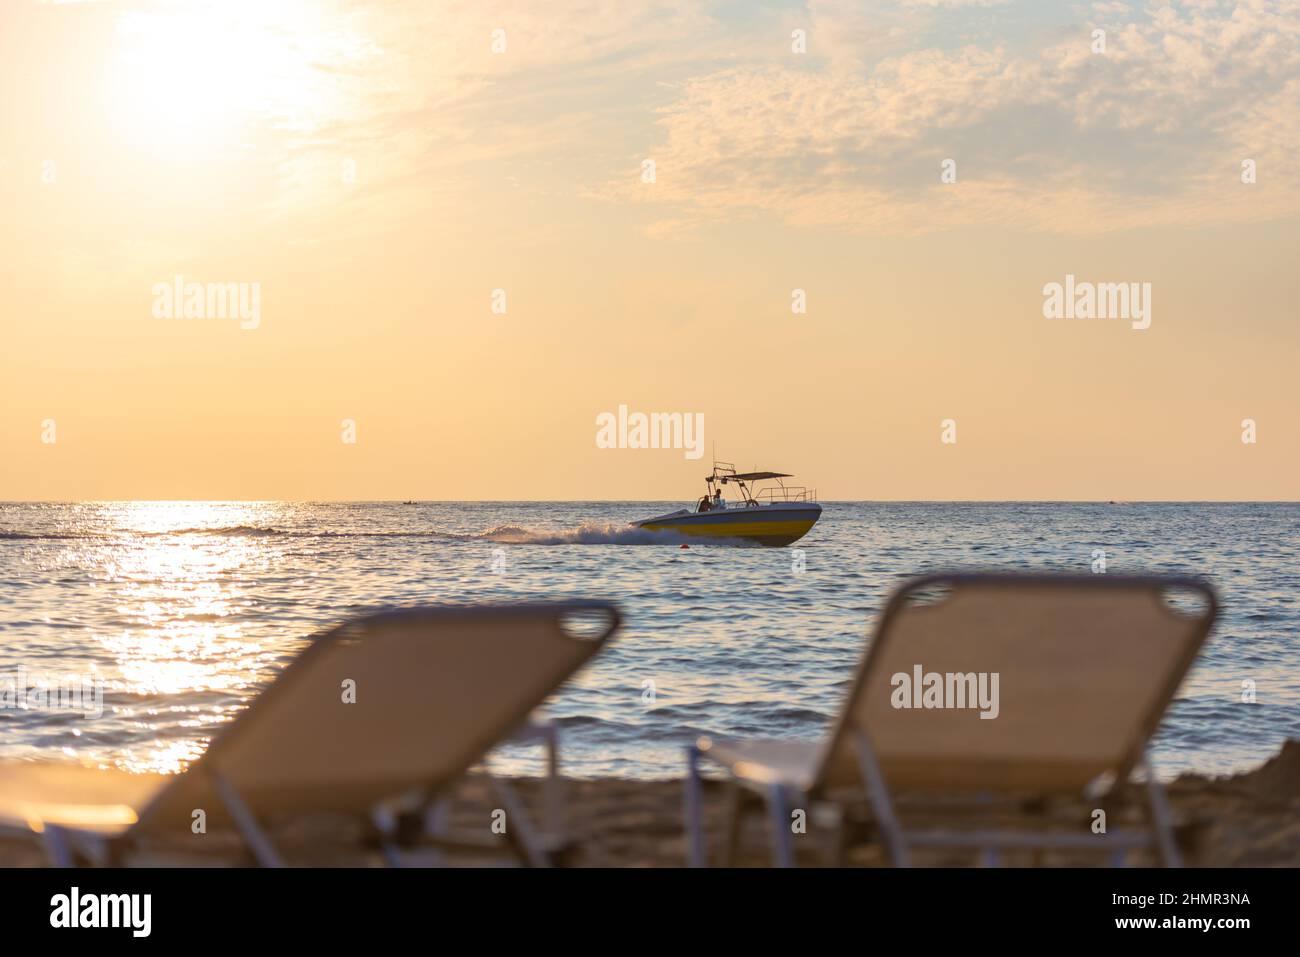 The backs of the sun loungers in front of the sea with a boat. Evening on the beach. Focus on the boat. Stock Photo